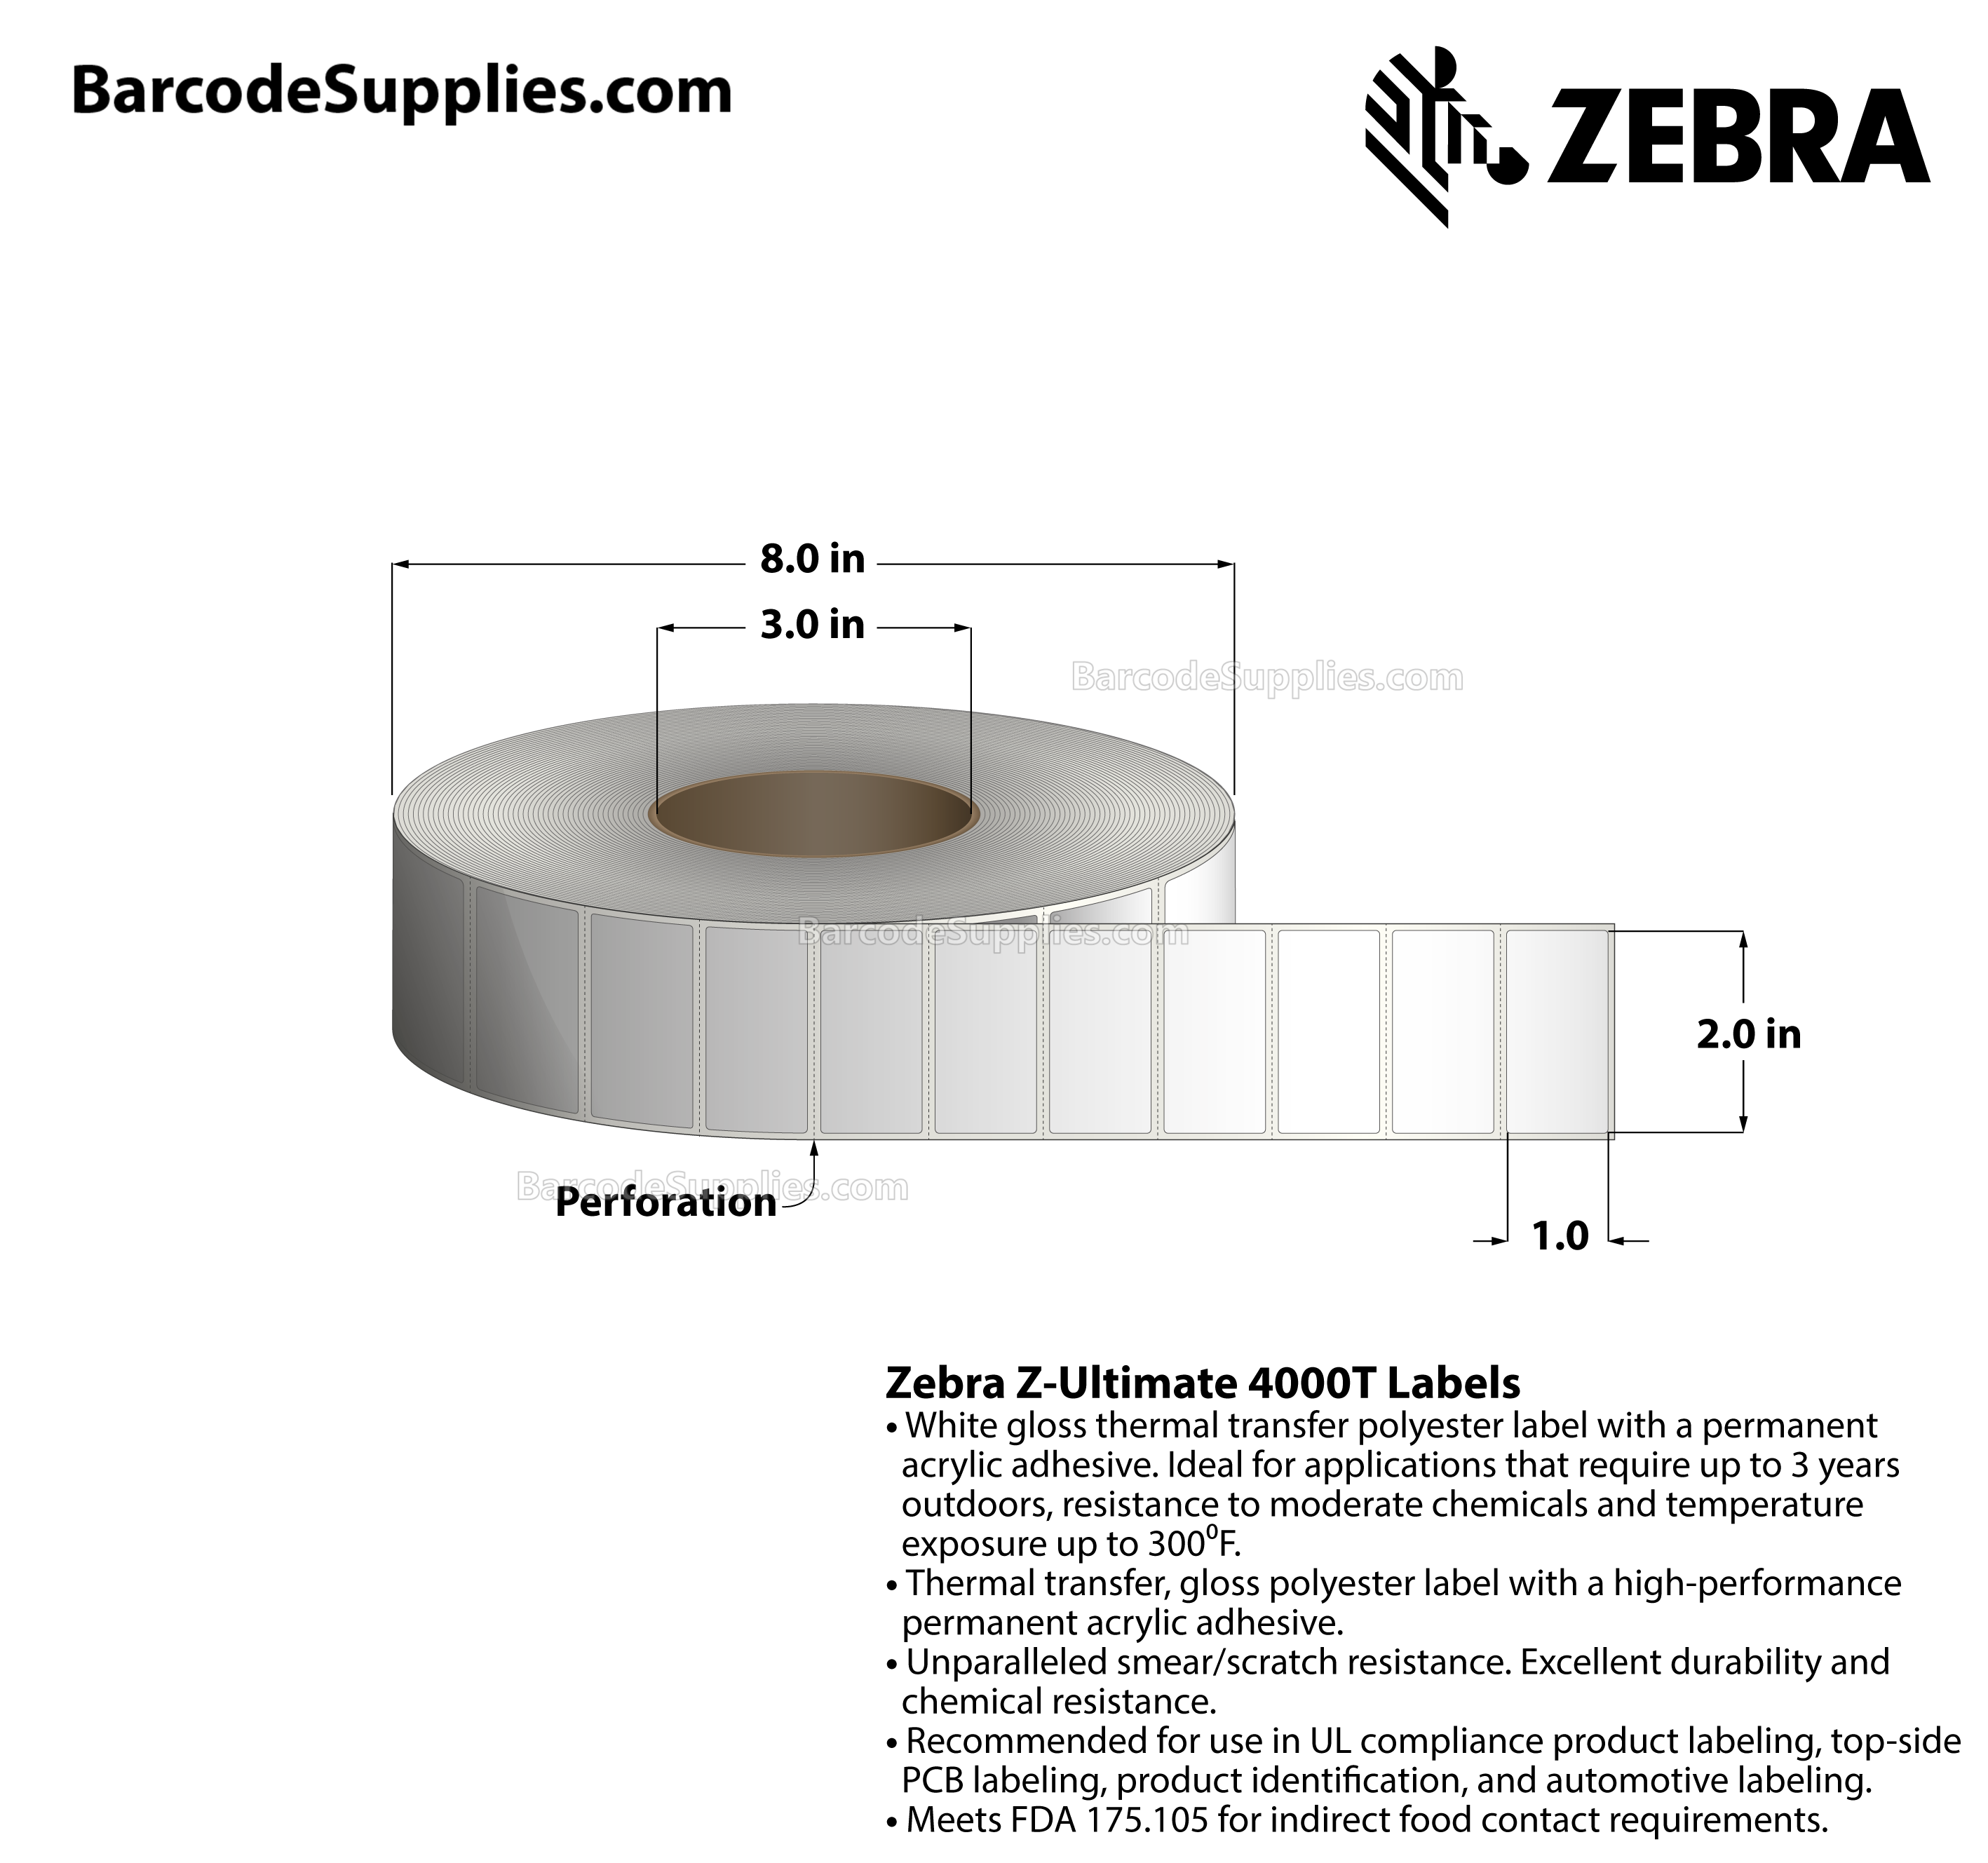 2 x 1 Thermal Transfer White Z-Ultimate 4000T Labels With Permanent Adhesive - Perforated - 5570 Labels Per Roll - Carton Of 4 Rolls - 22280 Labels Total - MPN: 10011708